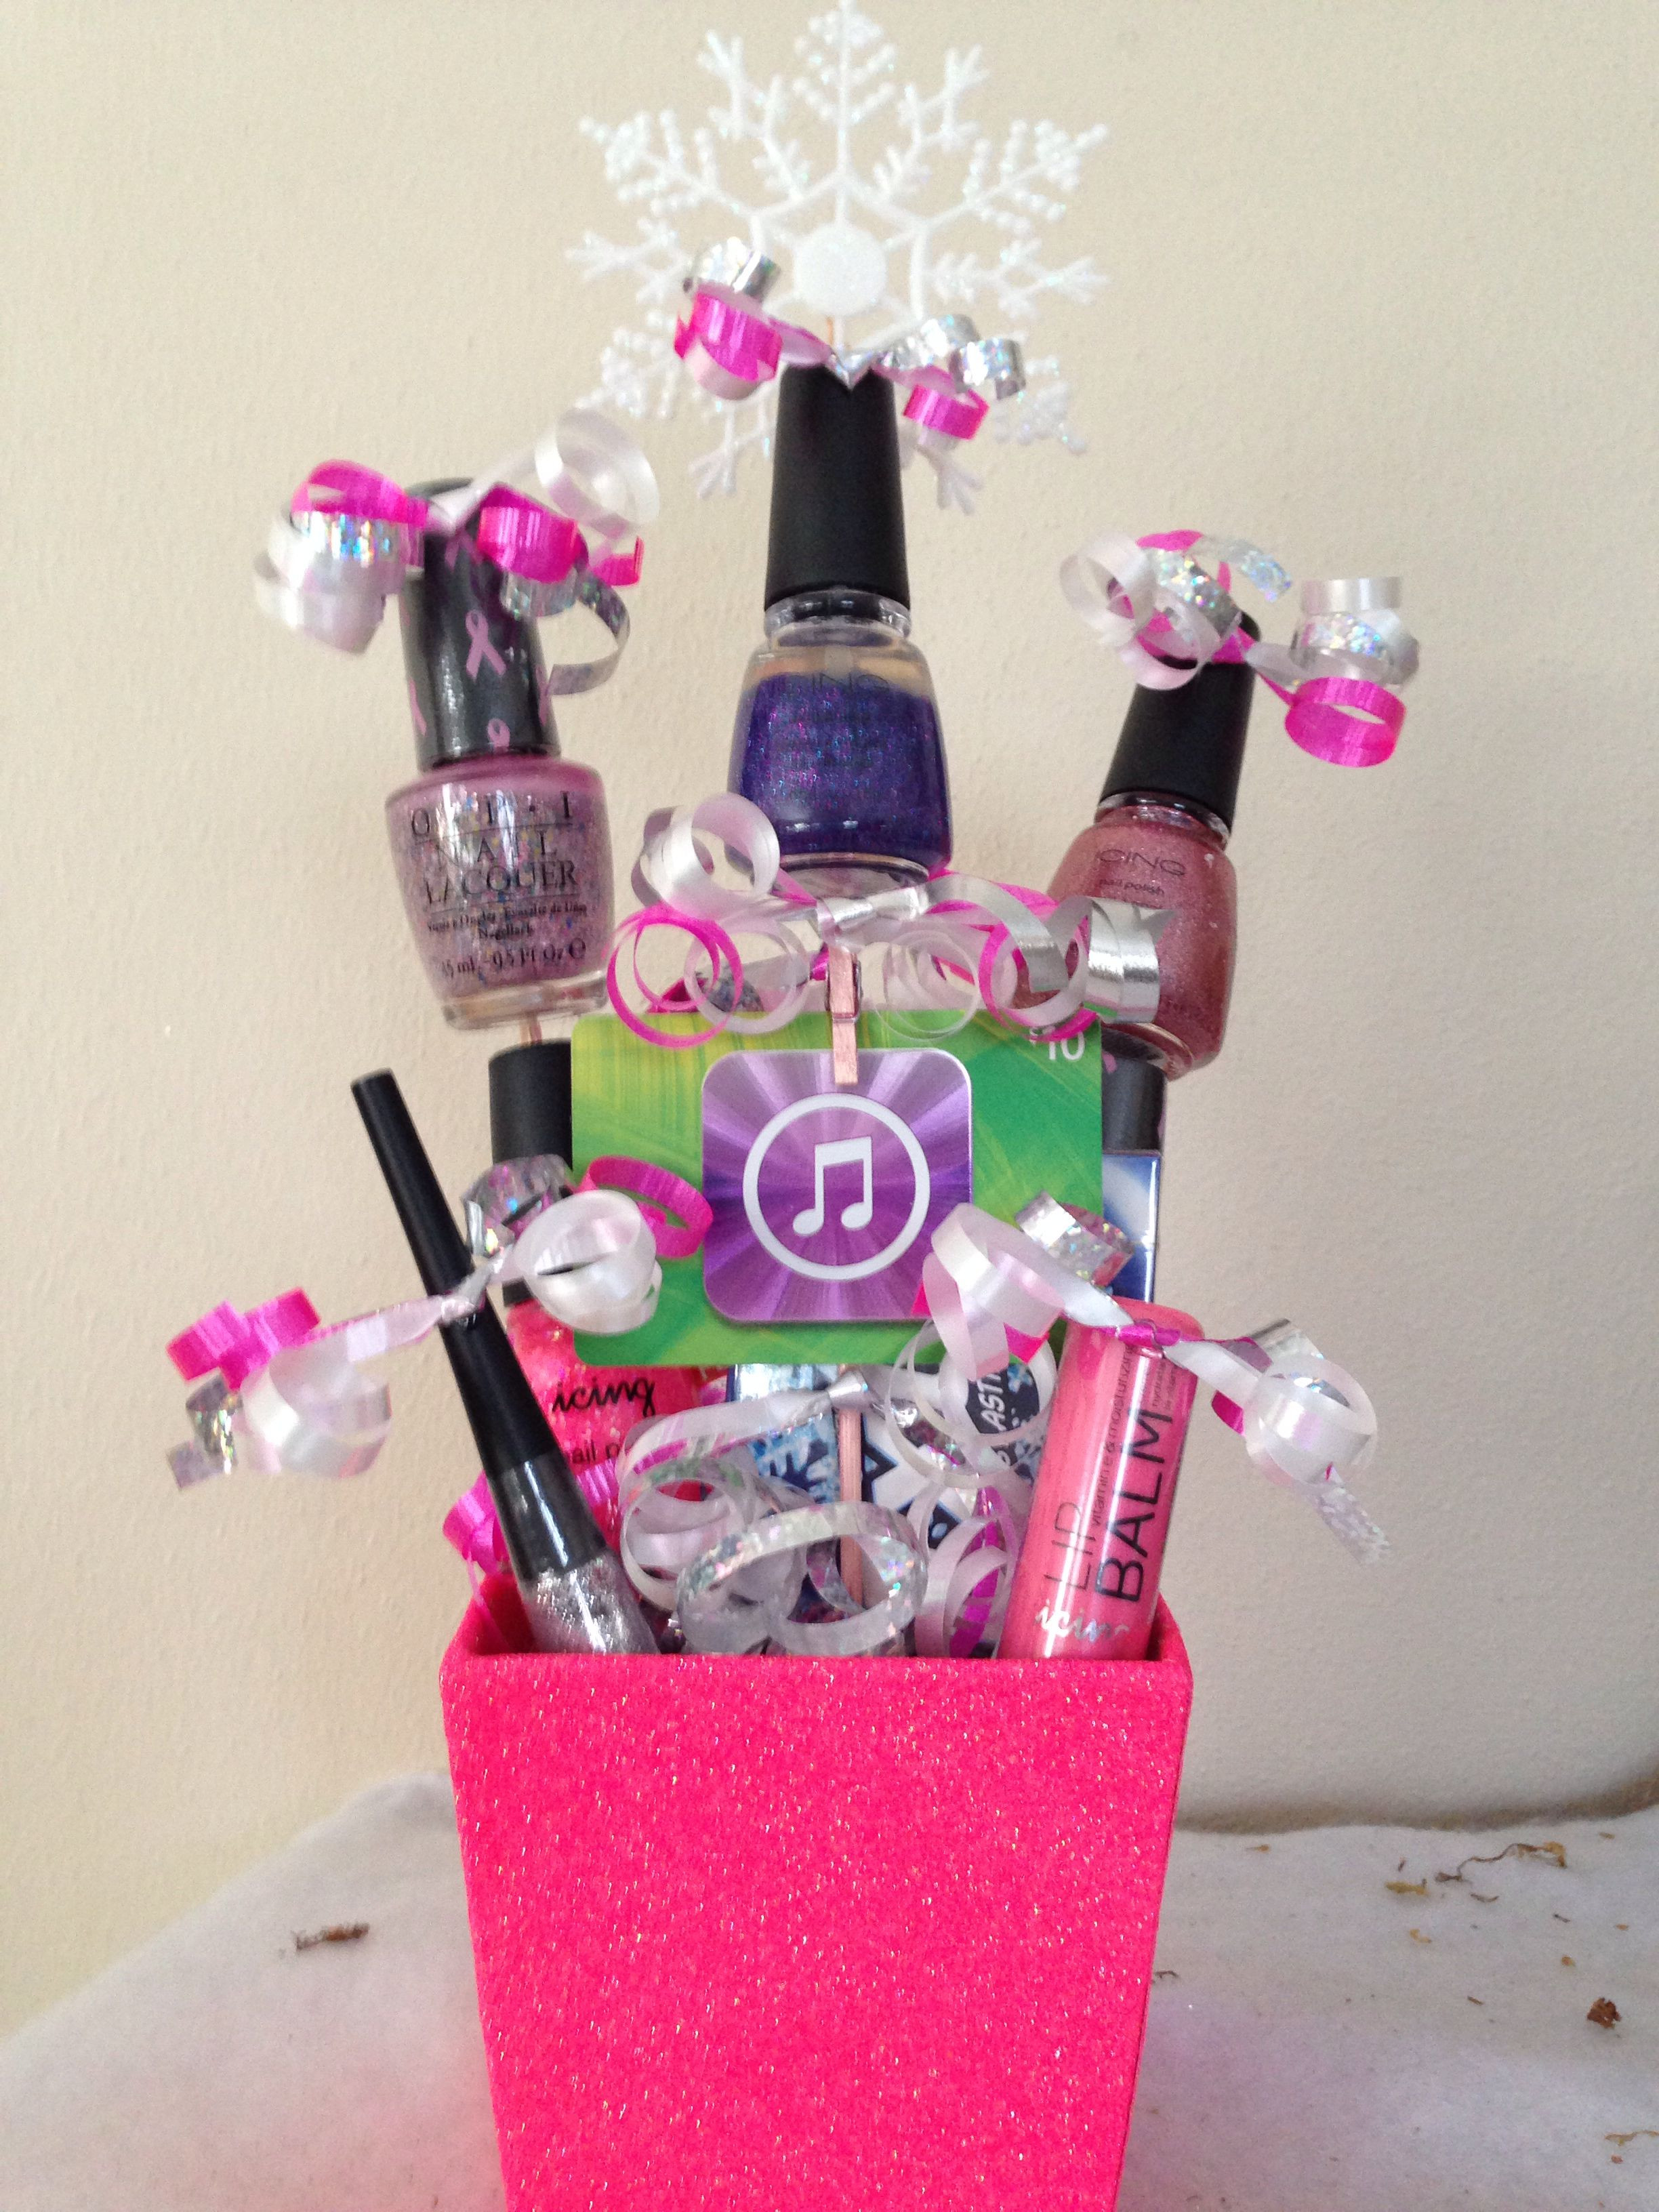 Cute Gift Basket Ideas For Girlfriend
 Teen t basket I like the cute bows on top of the ts